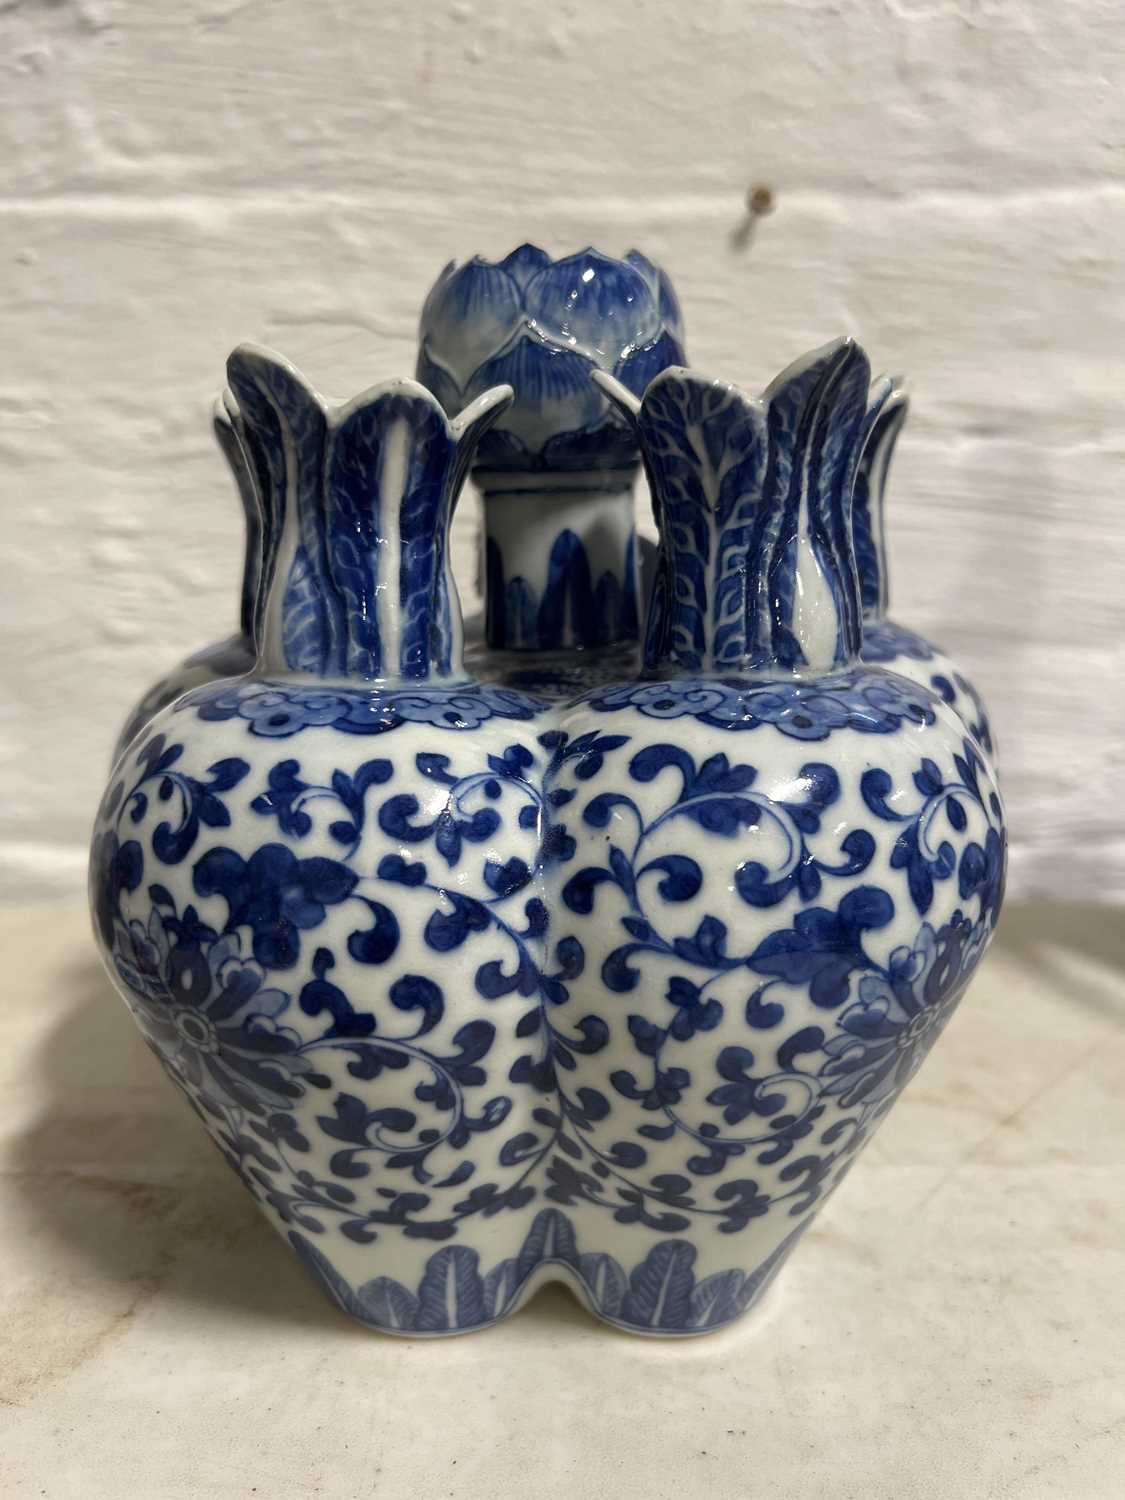 Chinese porcelain blue and white tulip or bulb vase, 19th century - Image 7 of 9